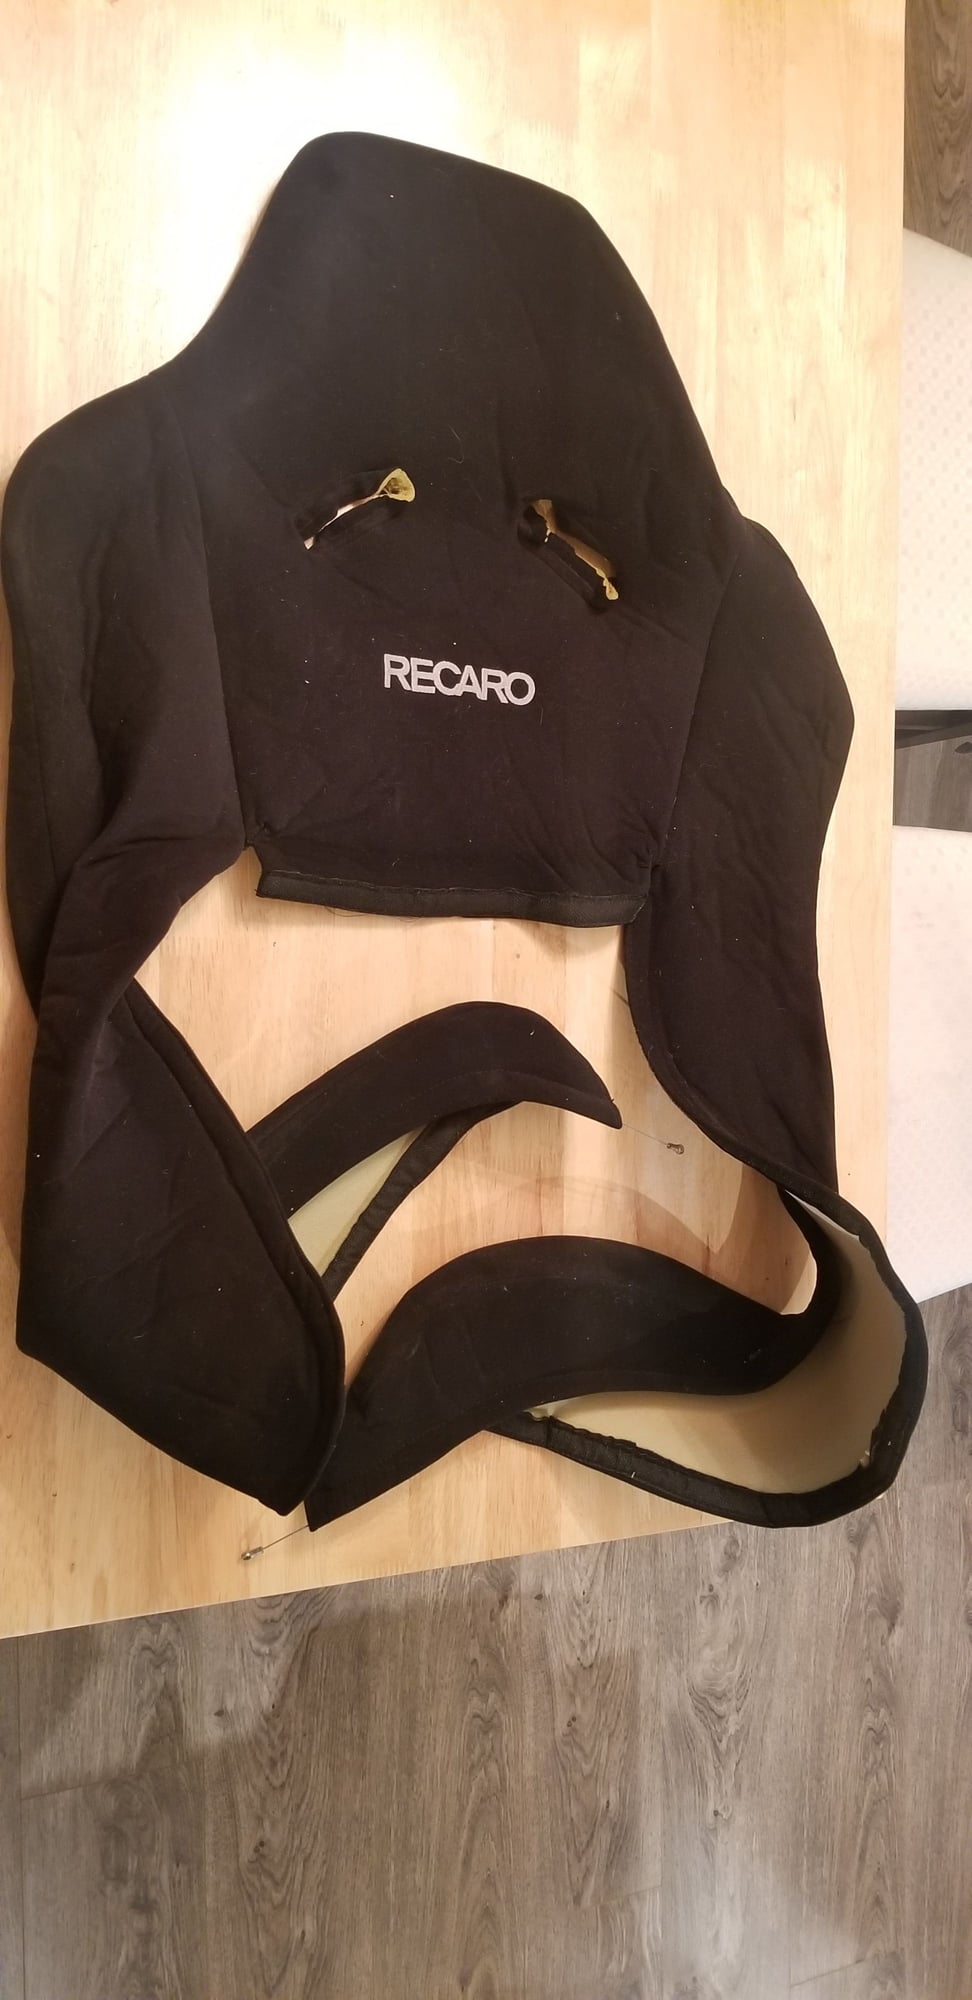 Interior/Upholstery - Authentic Recaro RZ Seat Upholstery - Used - 1993 to 2002 Mazda RX-7 - Vancouver, BC V6K1N8, Canada